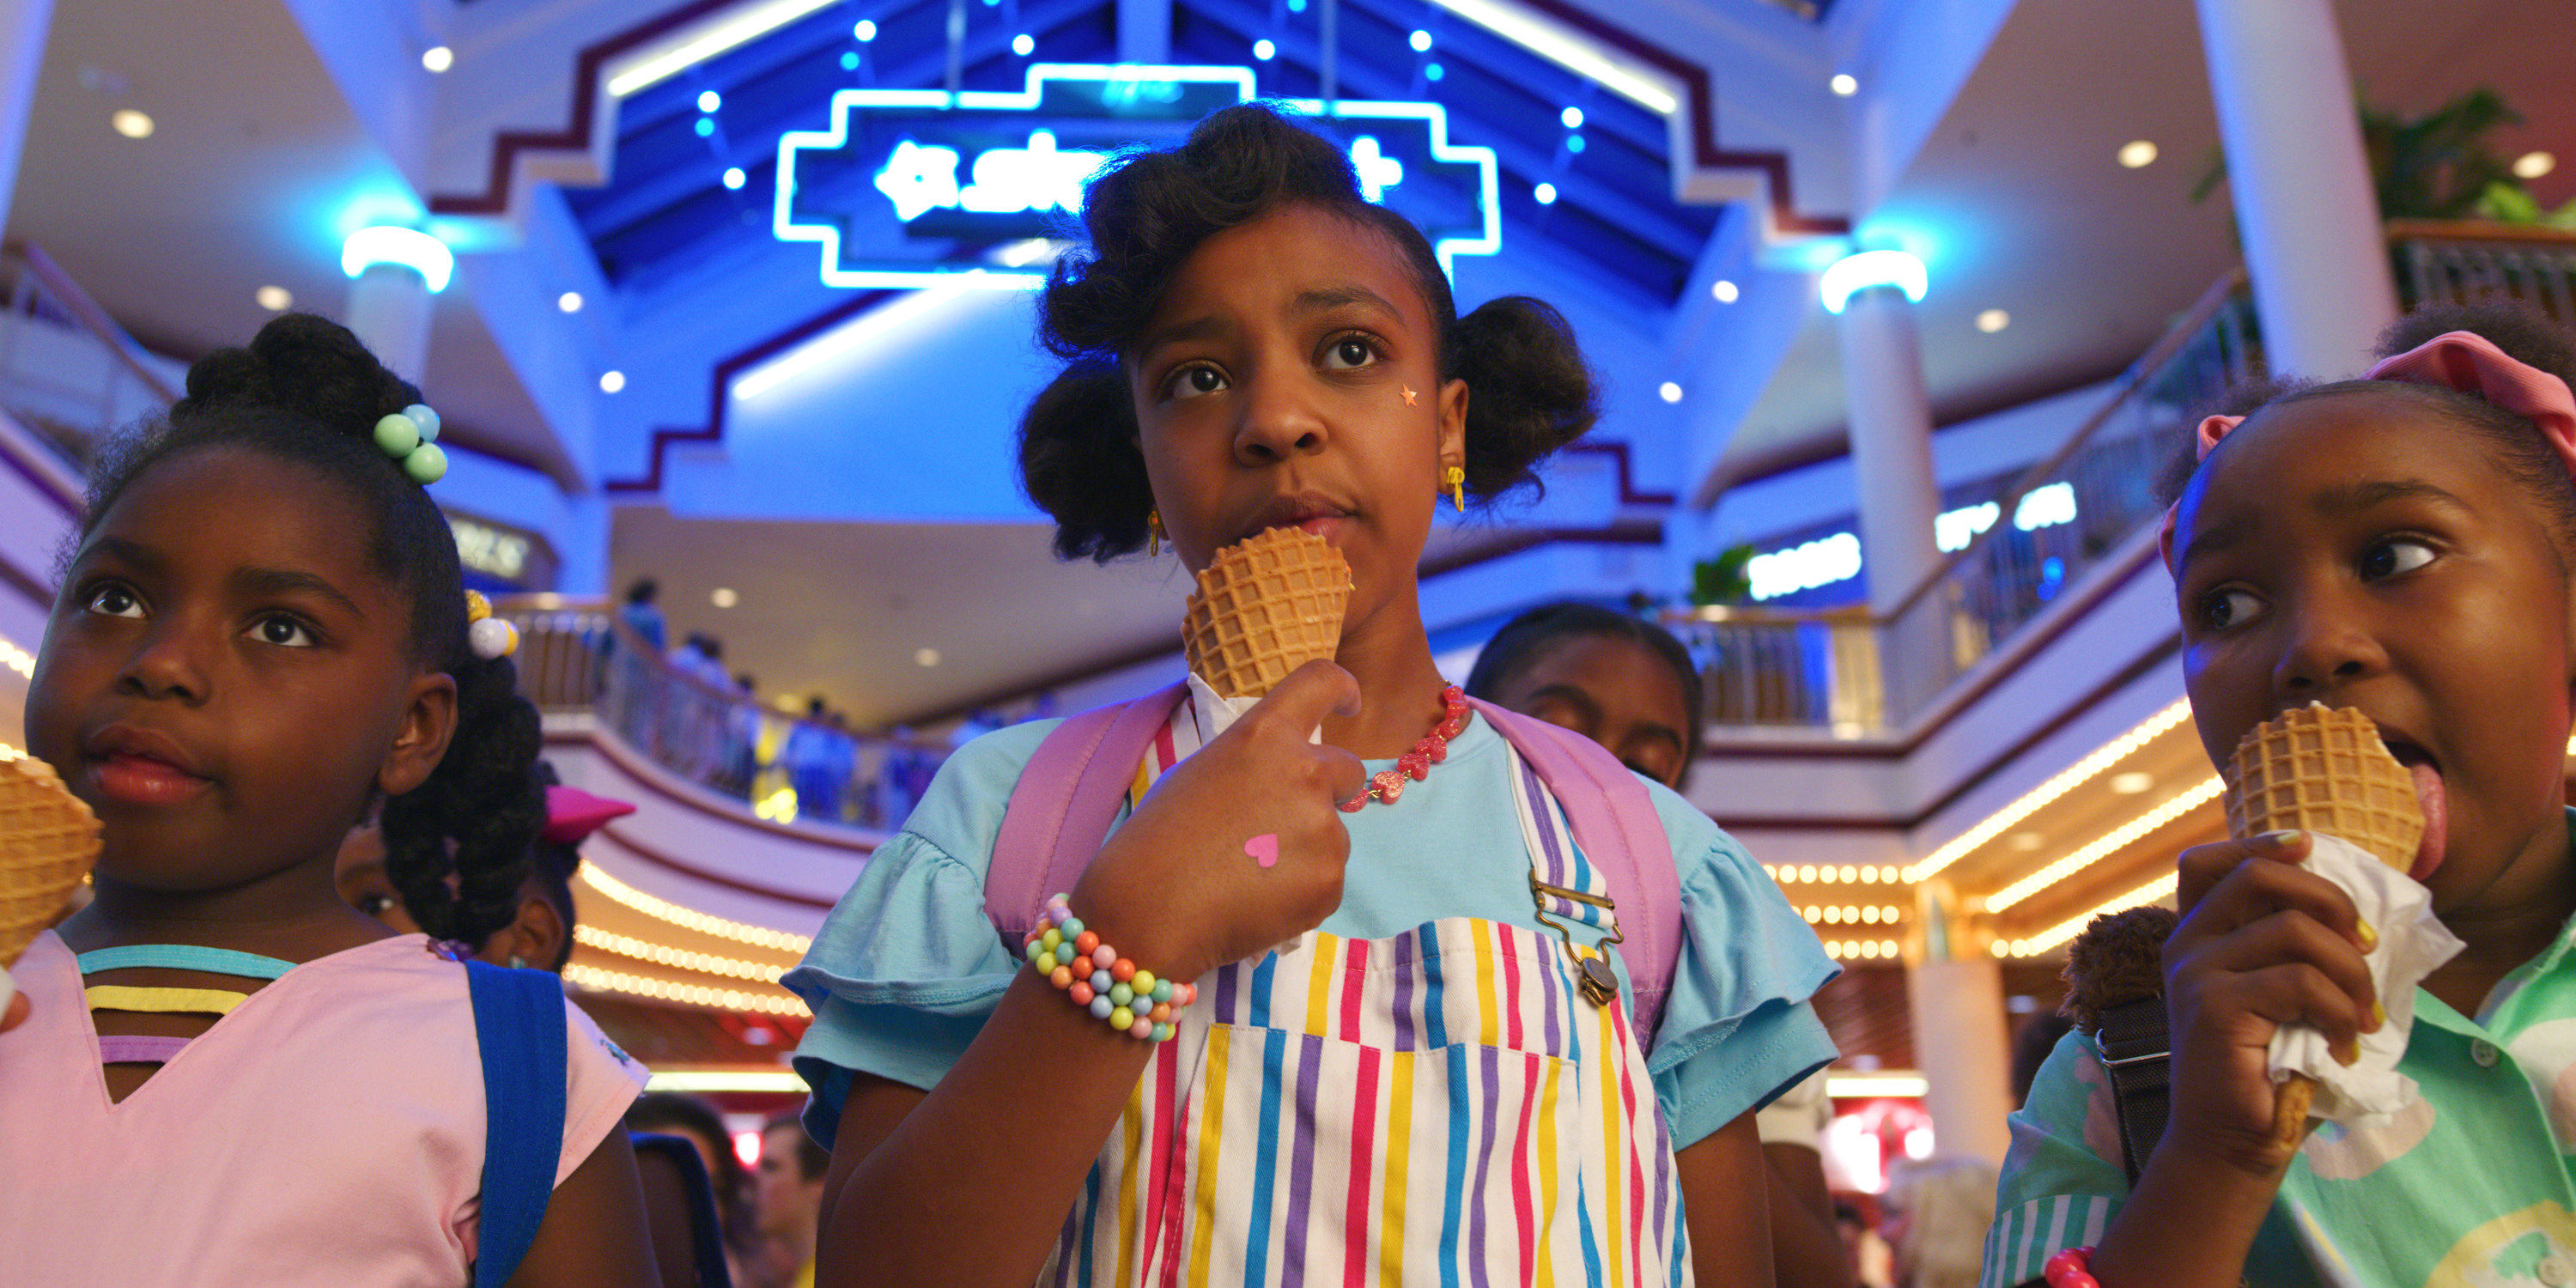 Erica and other girls eating ice cream cones